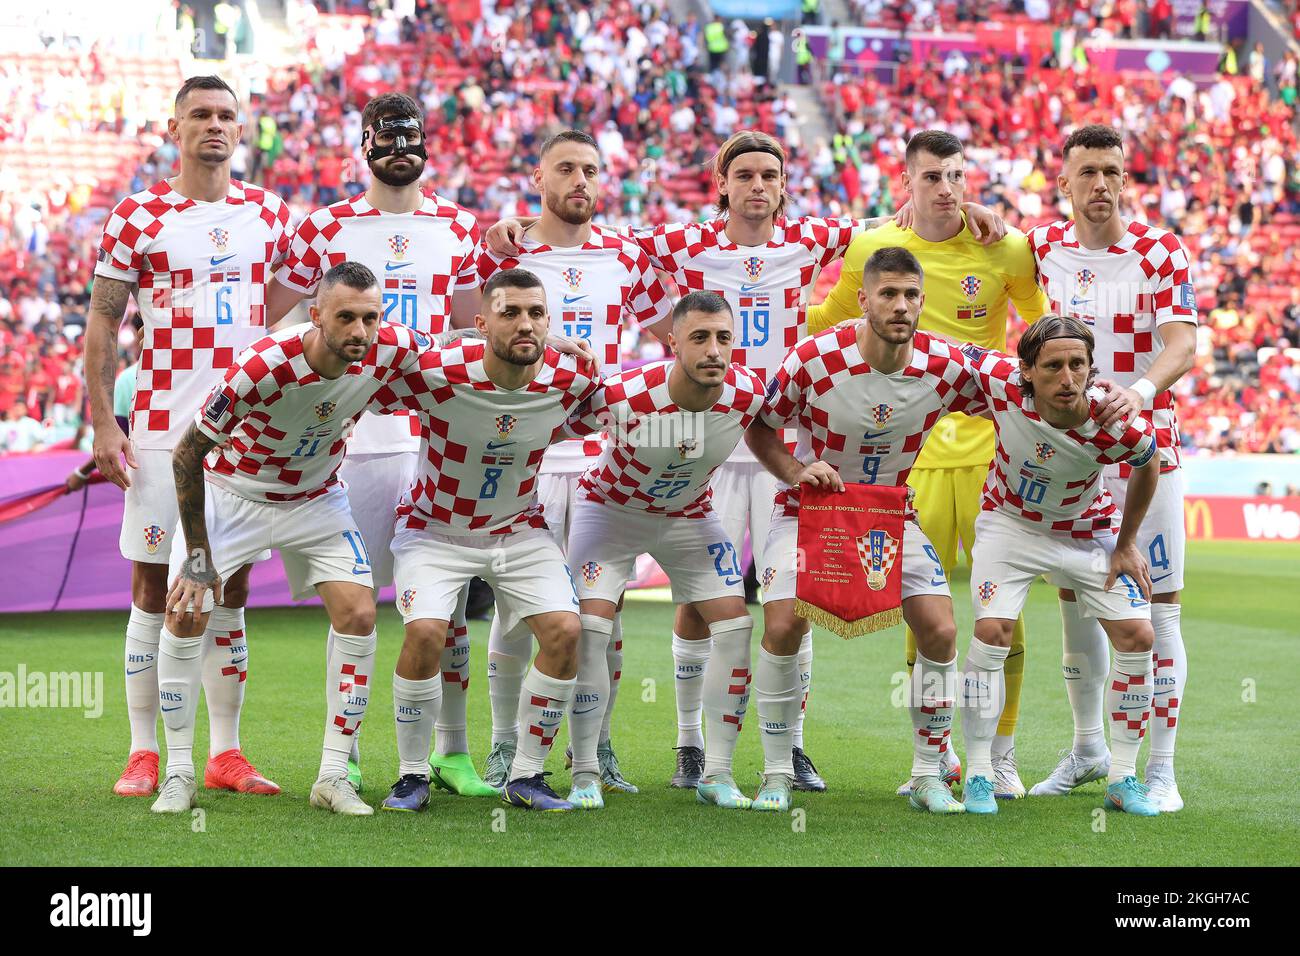 Al Khor, Qatar.November 23, 2022, Croatia players line up for a team photo prior to the FIFA World Cup Qatar 2022 Group F match between Morocco and Croatia at Al Bayt Stadium on November 23, 2022 in Al Khor, Qatar. Photo by Goran Stanzl/PIXSELL Stock Photo